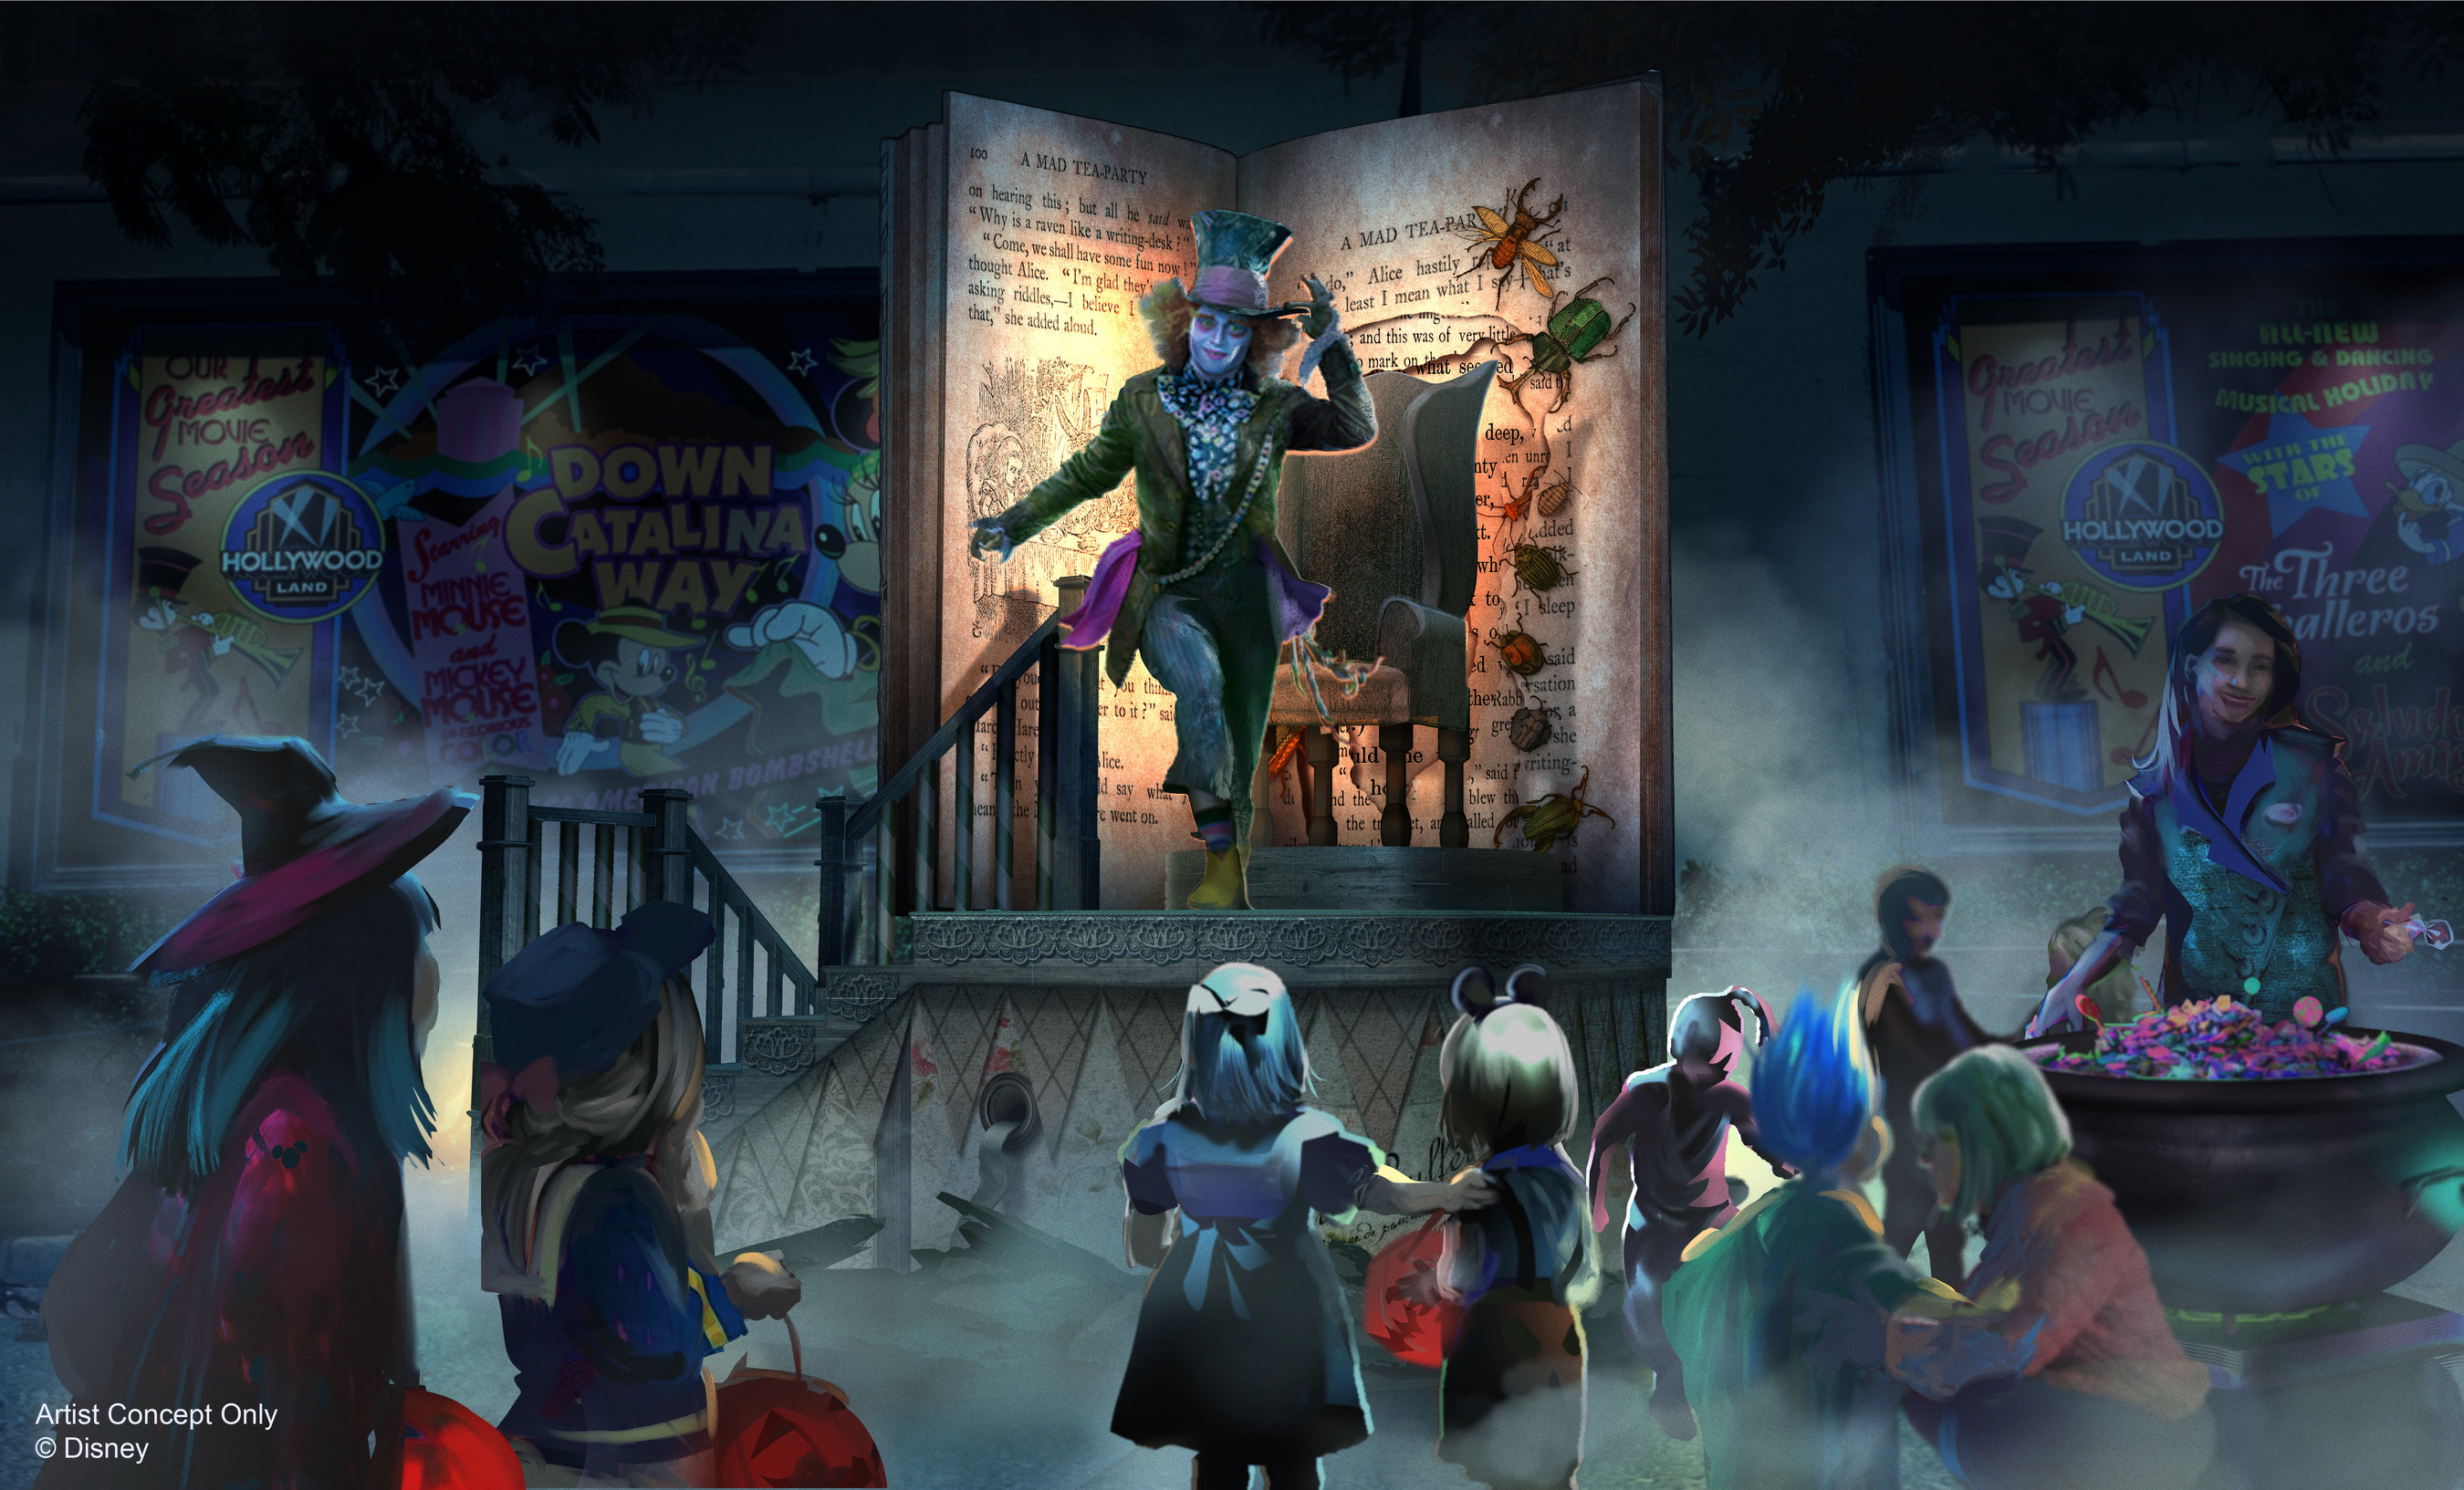 trick-or-treat trails themed to Disney Villains like the Mad Hatter, Dr. Fa...